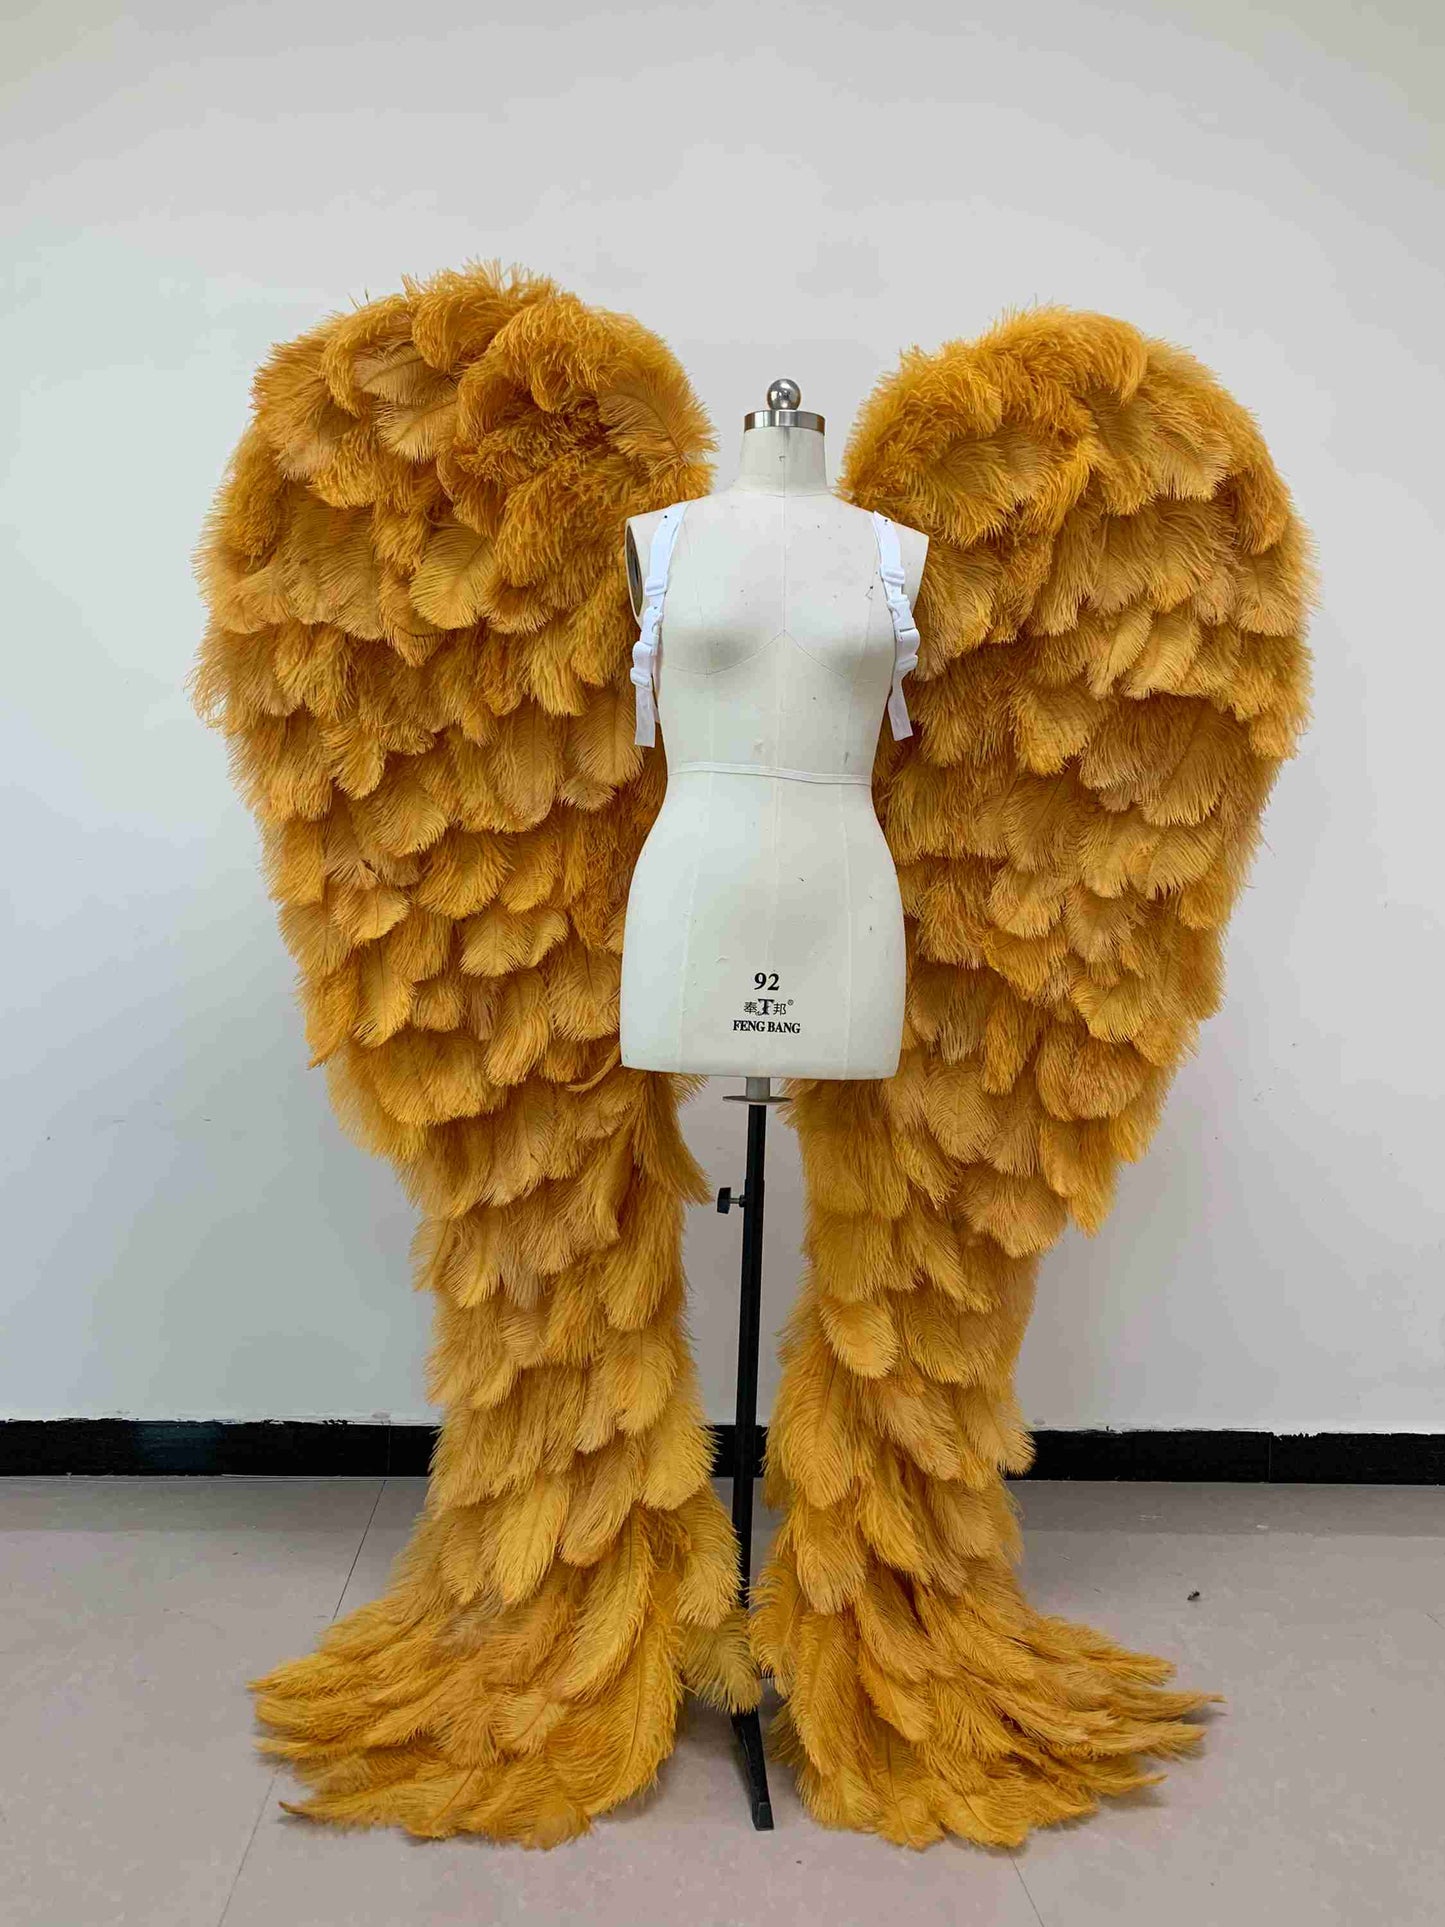 Our luxury gold angel wings from the front. Made from ostrich feathers. Wings for angel costume. Suitable for photoshoots especially for boudoirs.